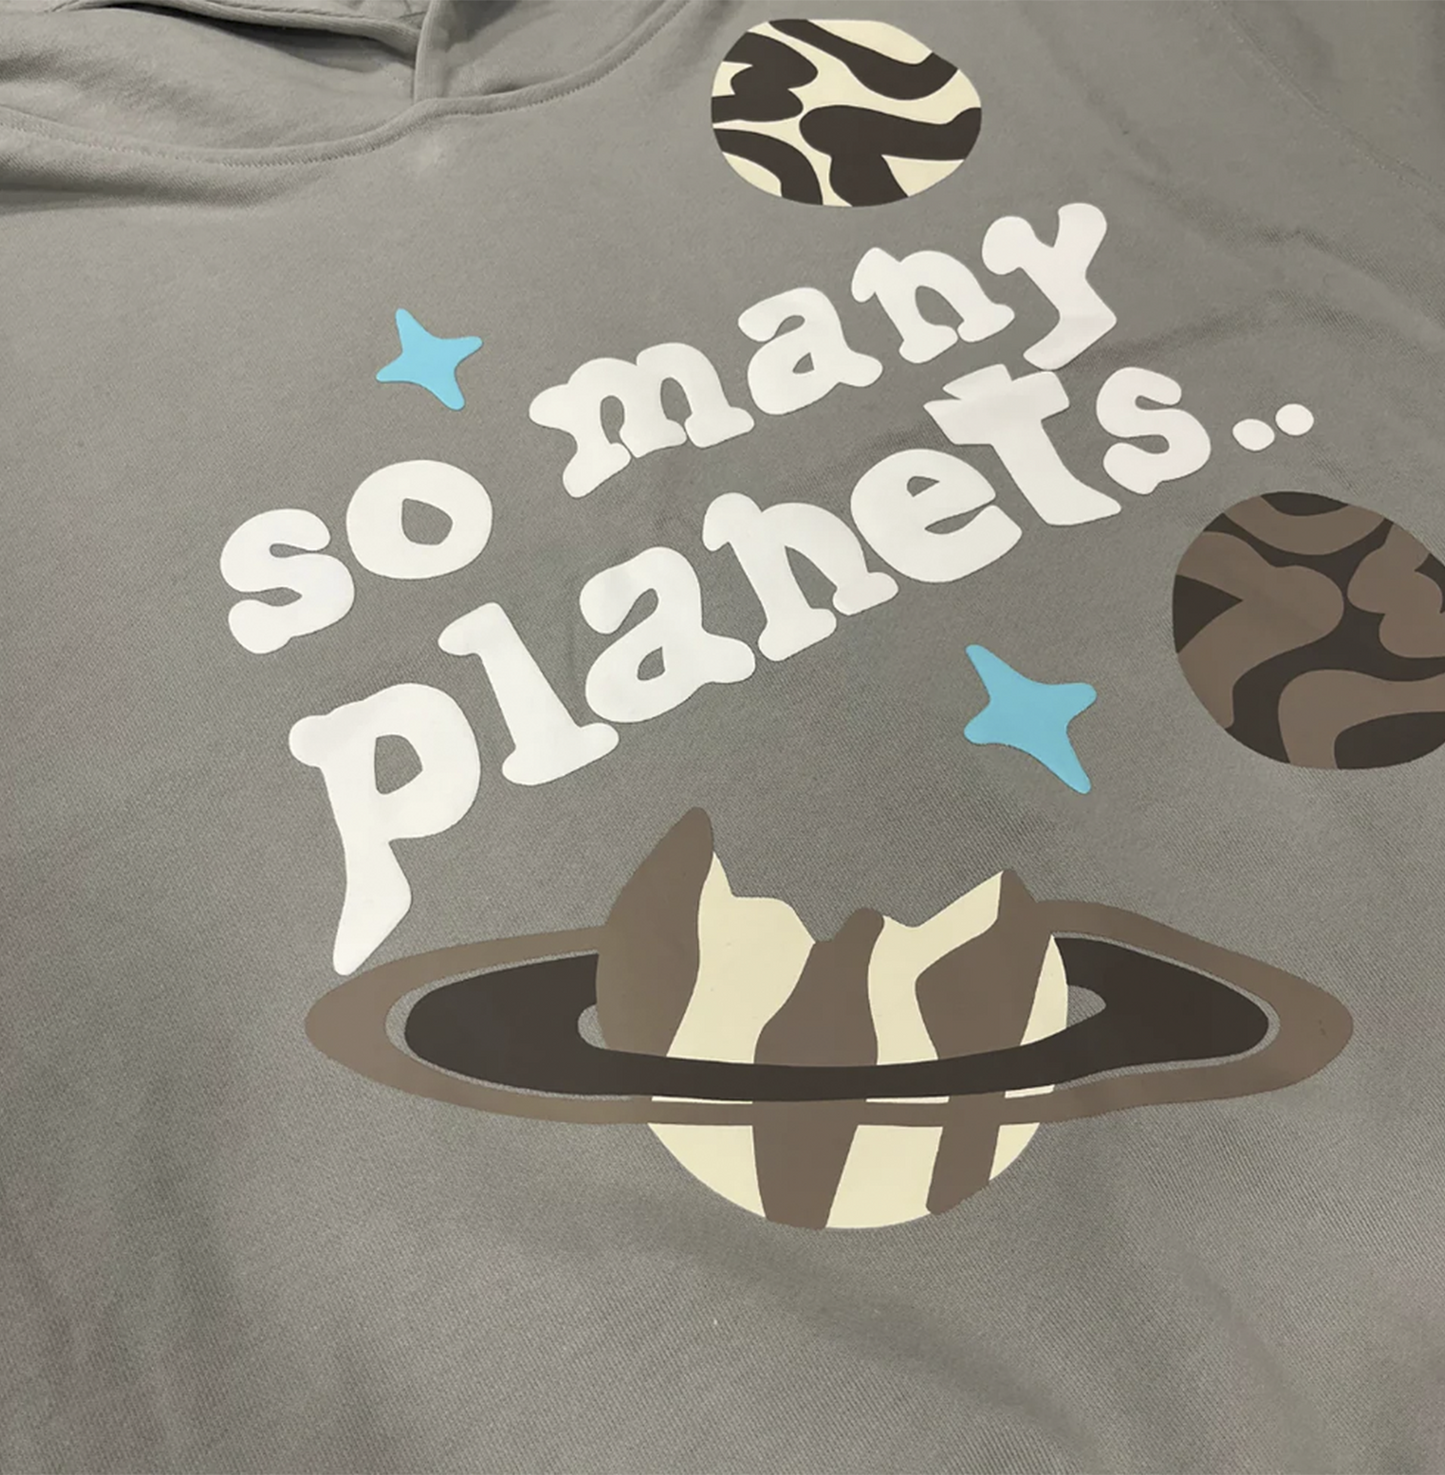 BROKEN PLANET HOODIE - "SO MANY PLANETS"